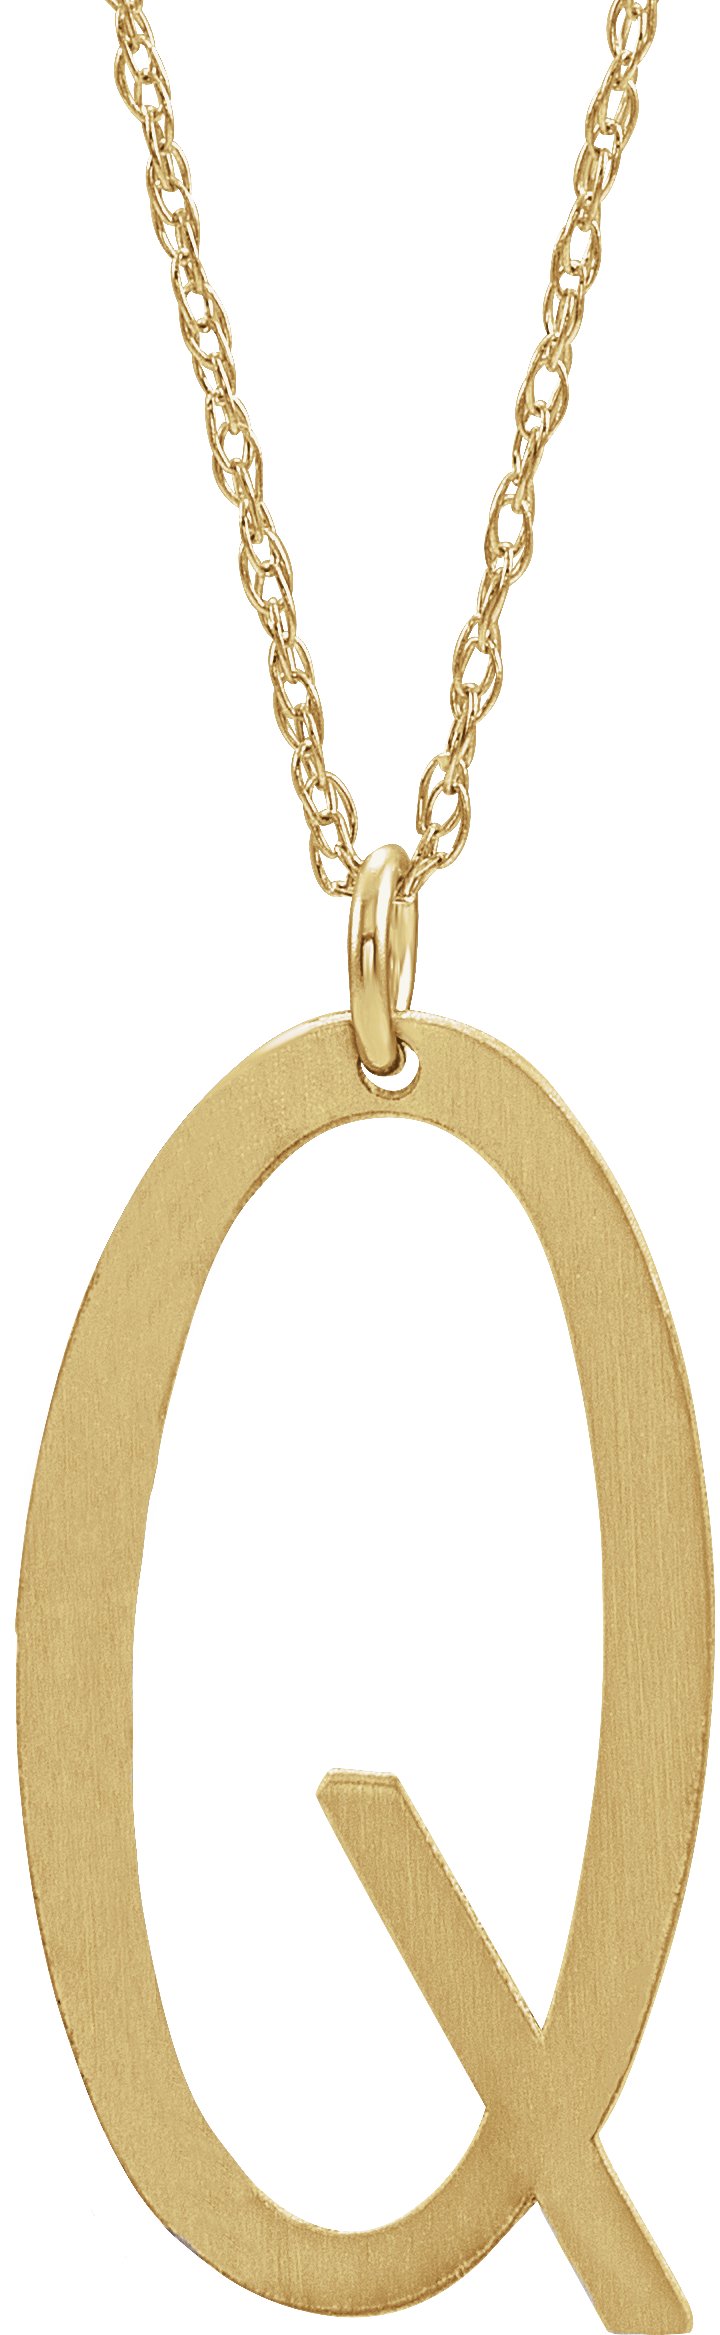 14K Yellow Gold-Plated Sterling Silver Block Initial Q 16-18" Necklace with Brush Finish